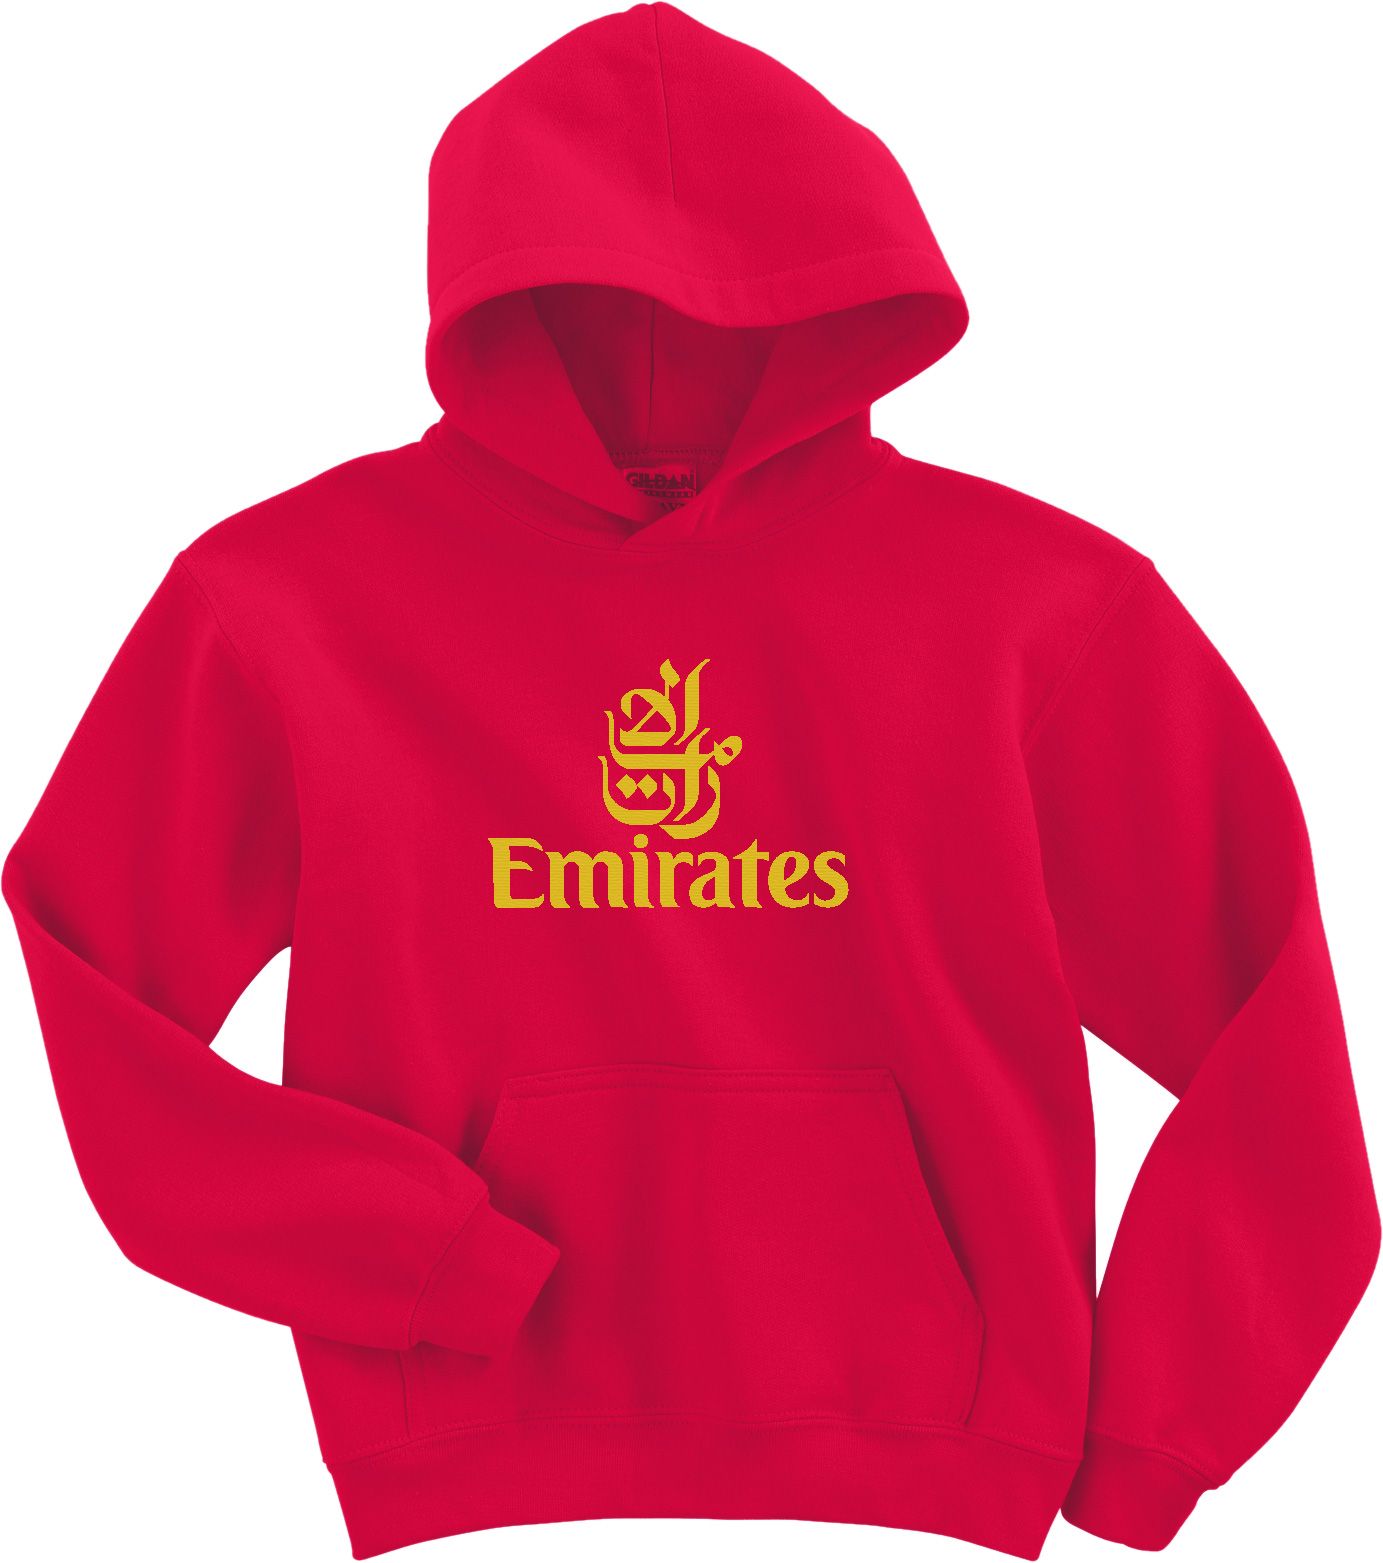  or White Hoody in cool cotton with a Gold or Red Vintage Airline Logo